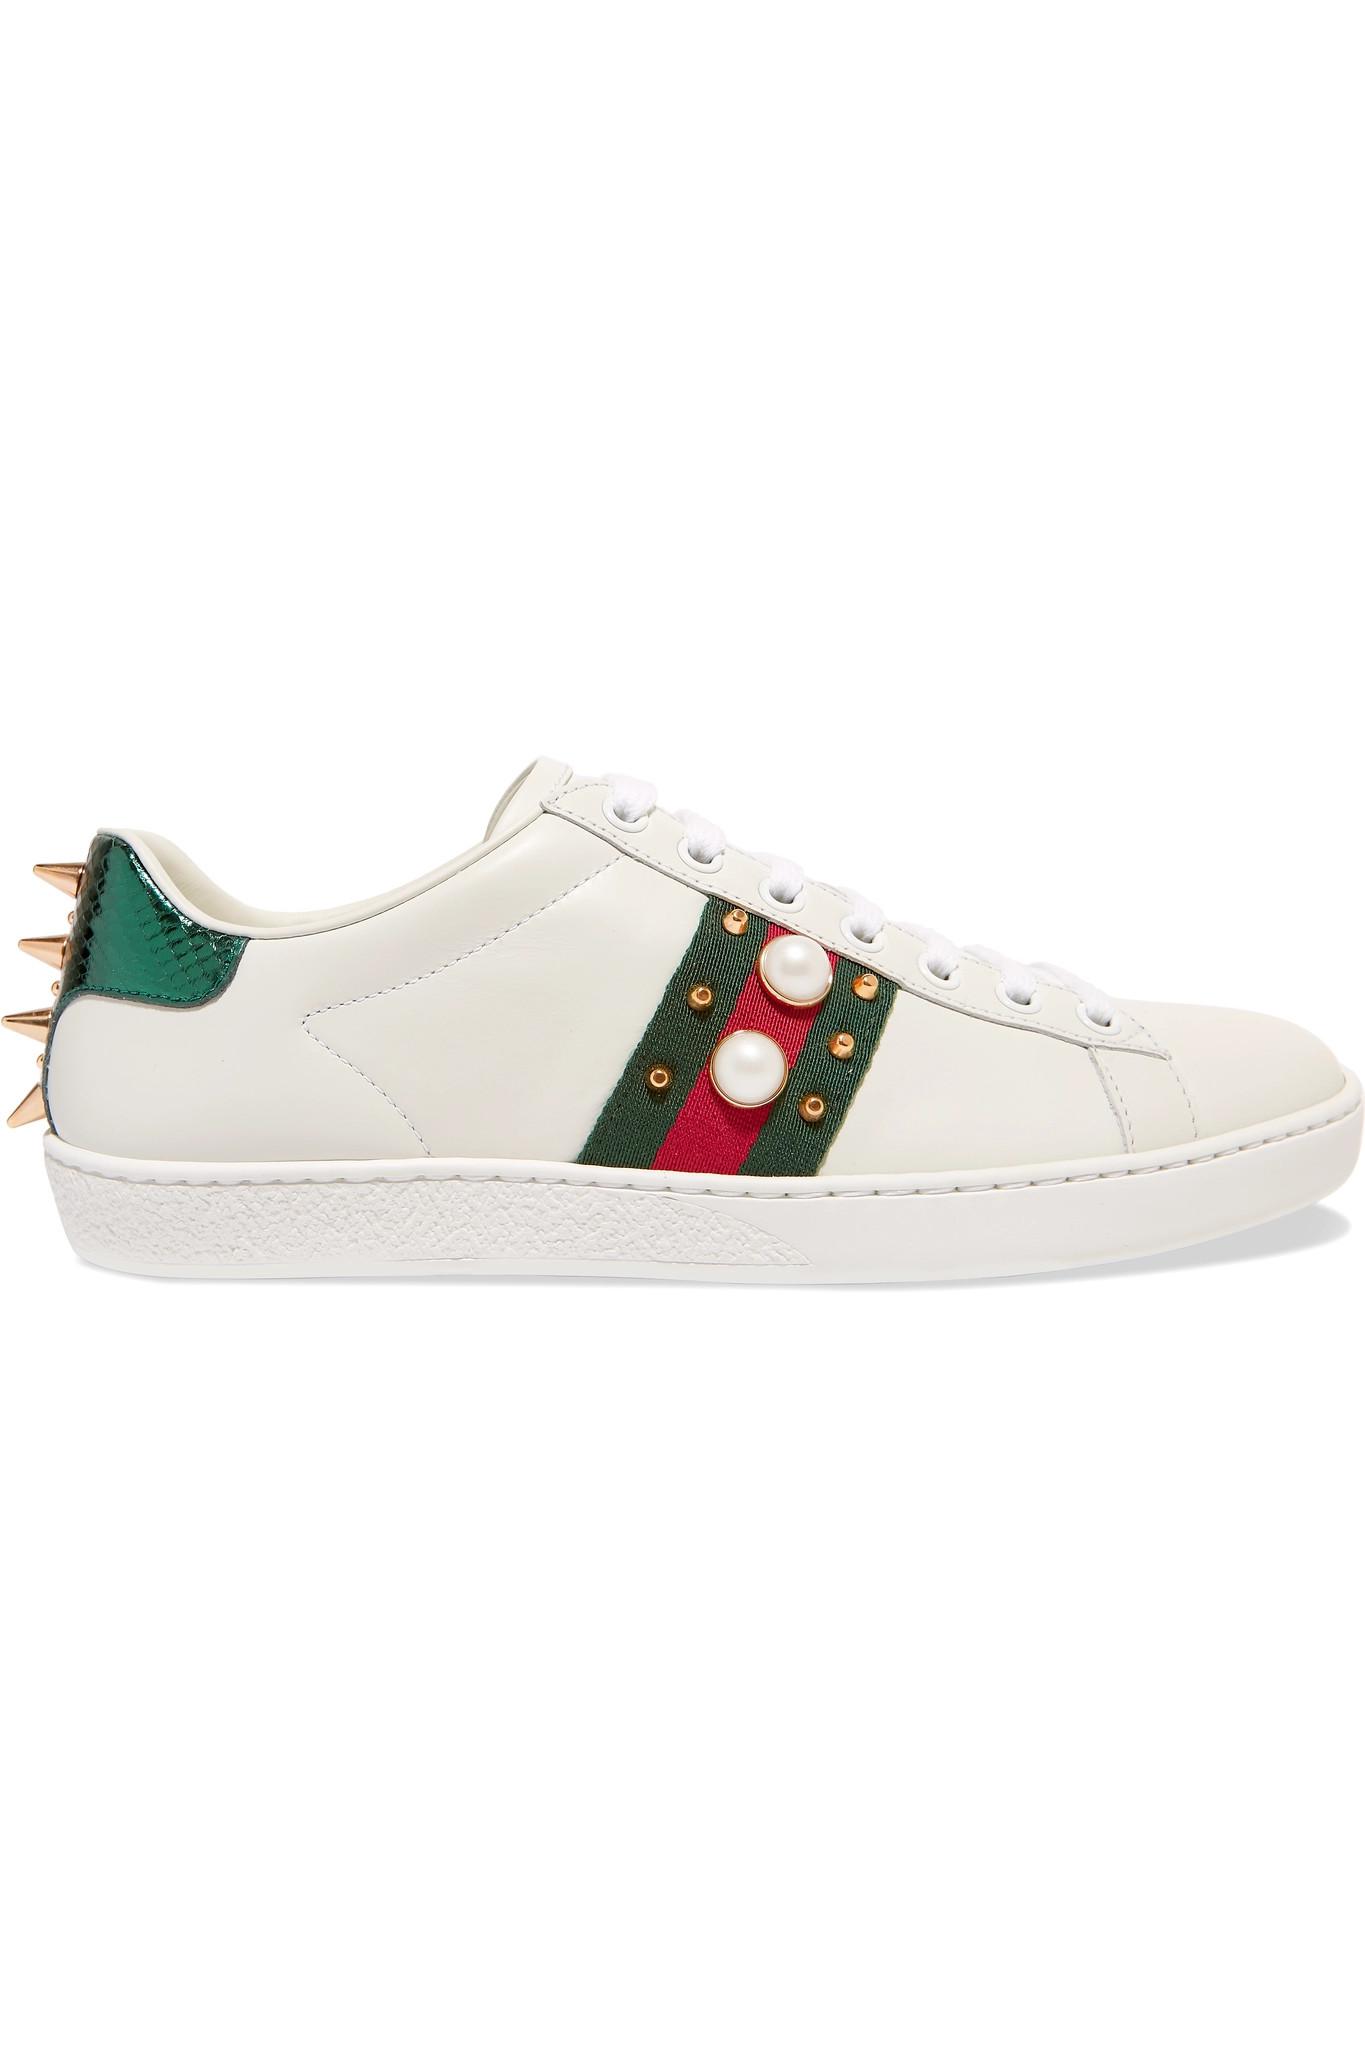 Lyst - Gucci Ace Faux Pearl-embellished Metallic Watersnake-trimmed ...